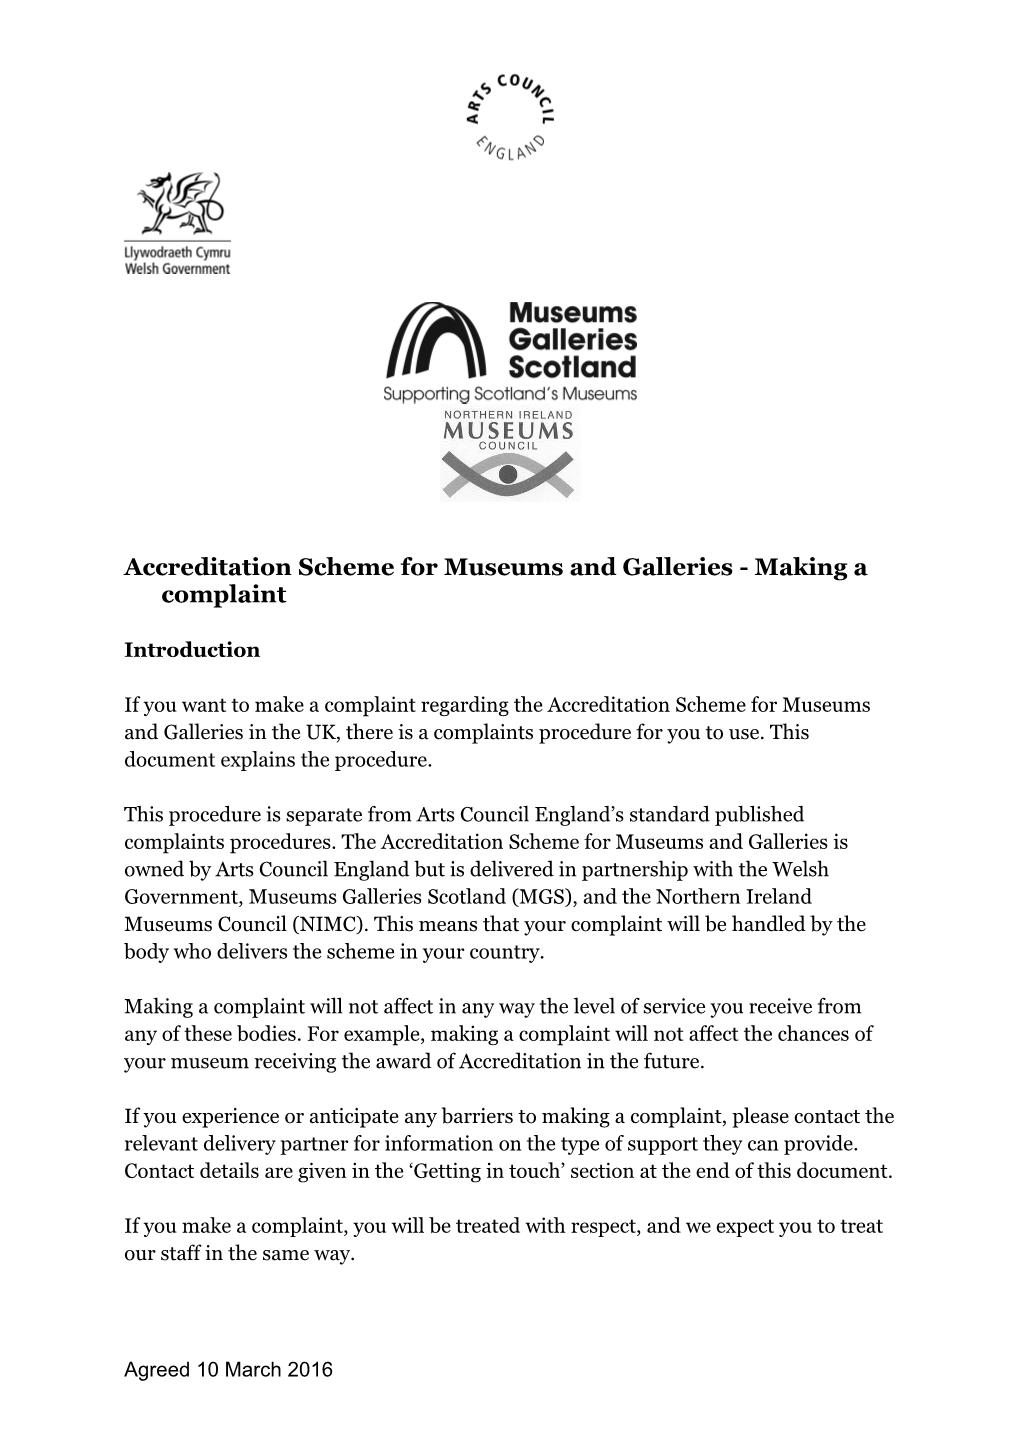 Accreditation Scheme for Museums and Galleries - Making a Complaint